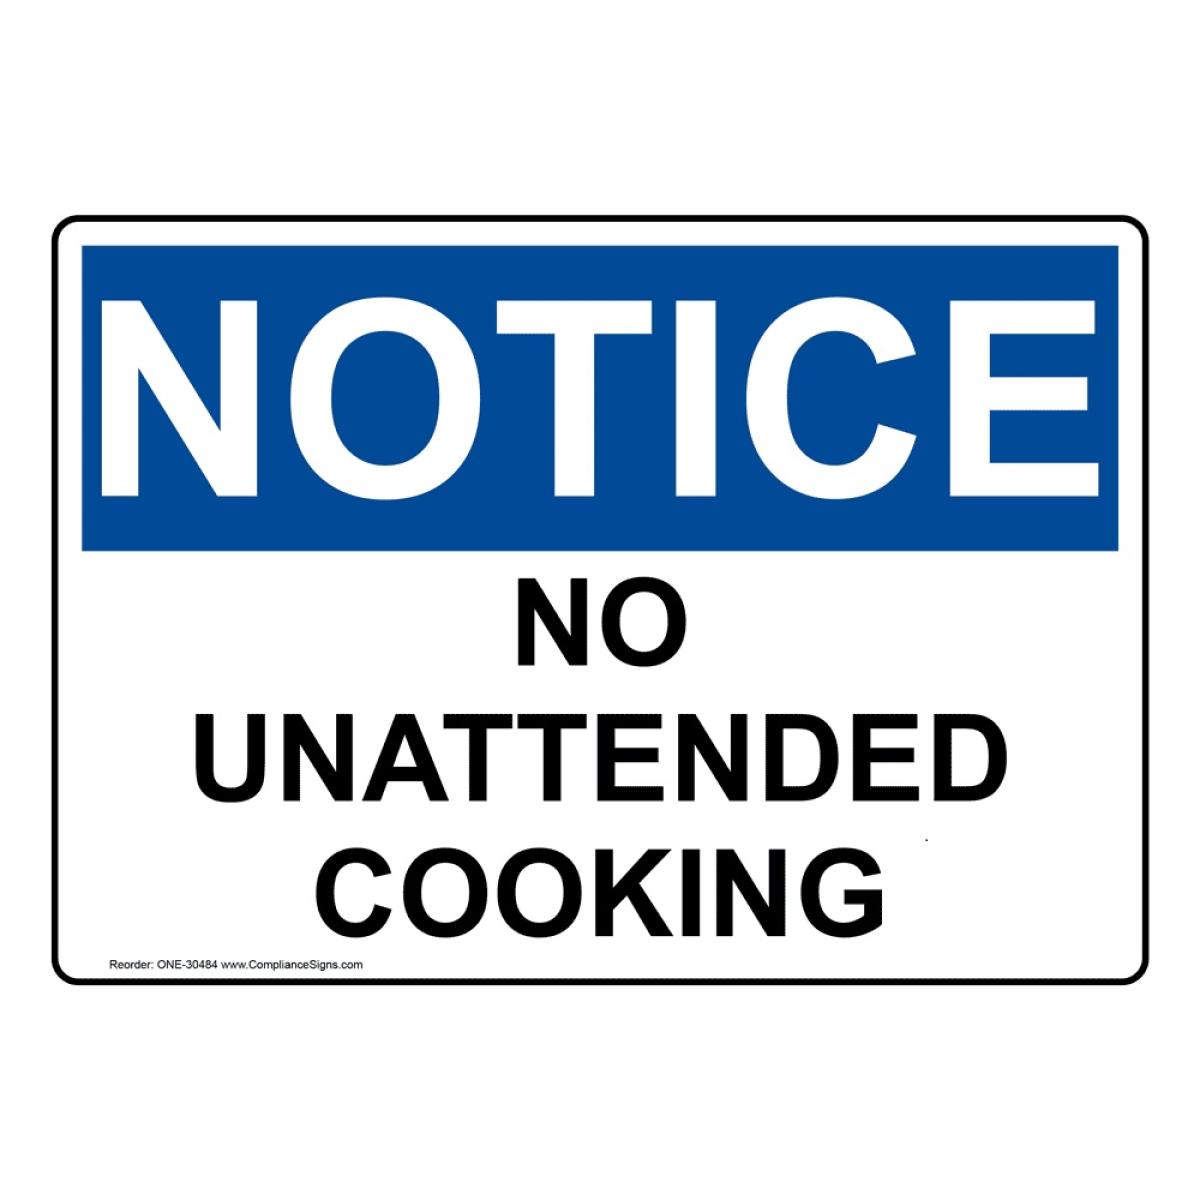 Notice no unattended cooking